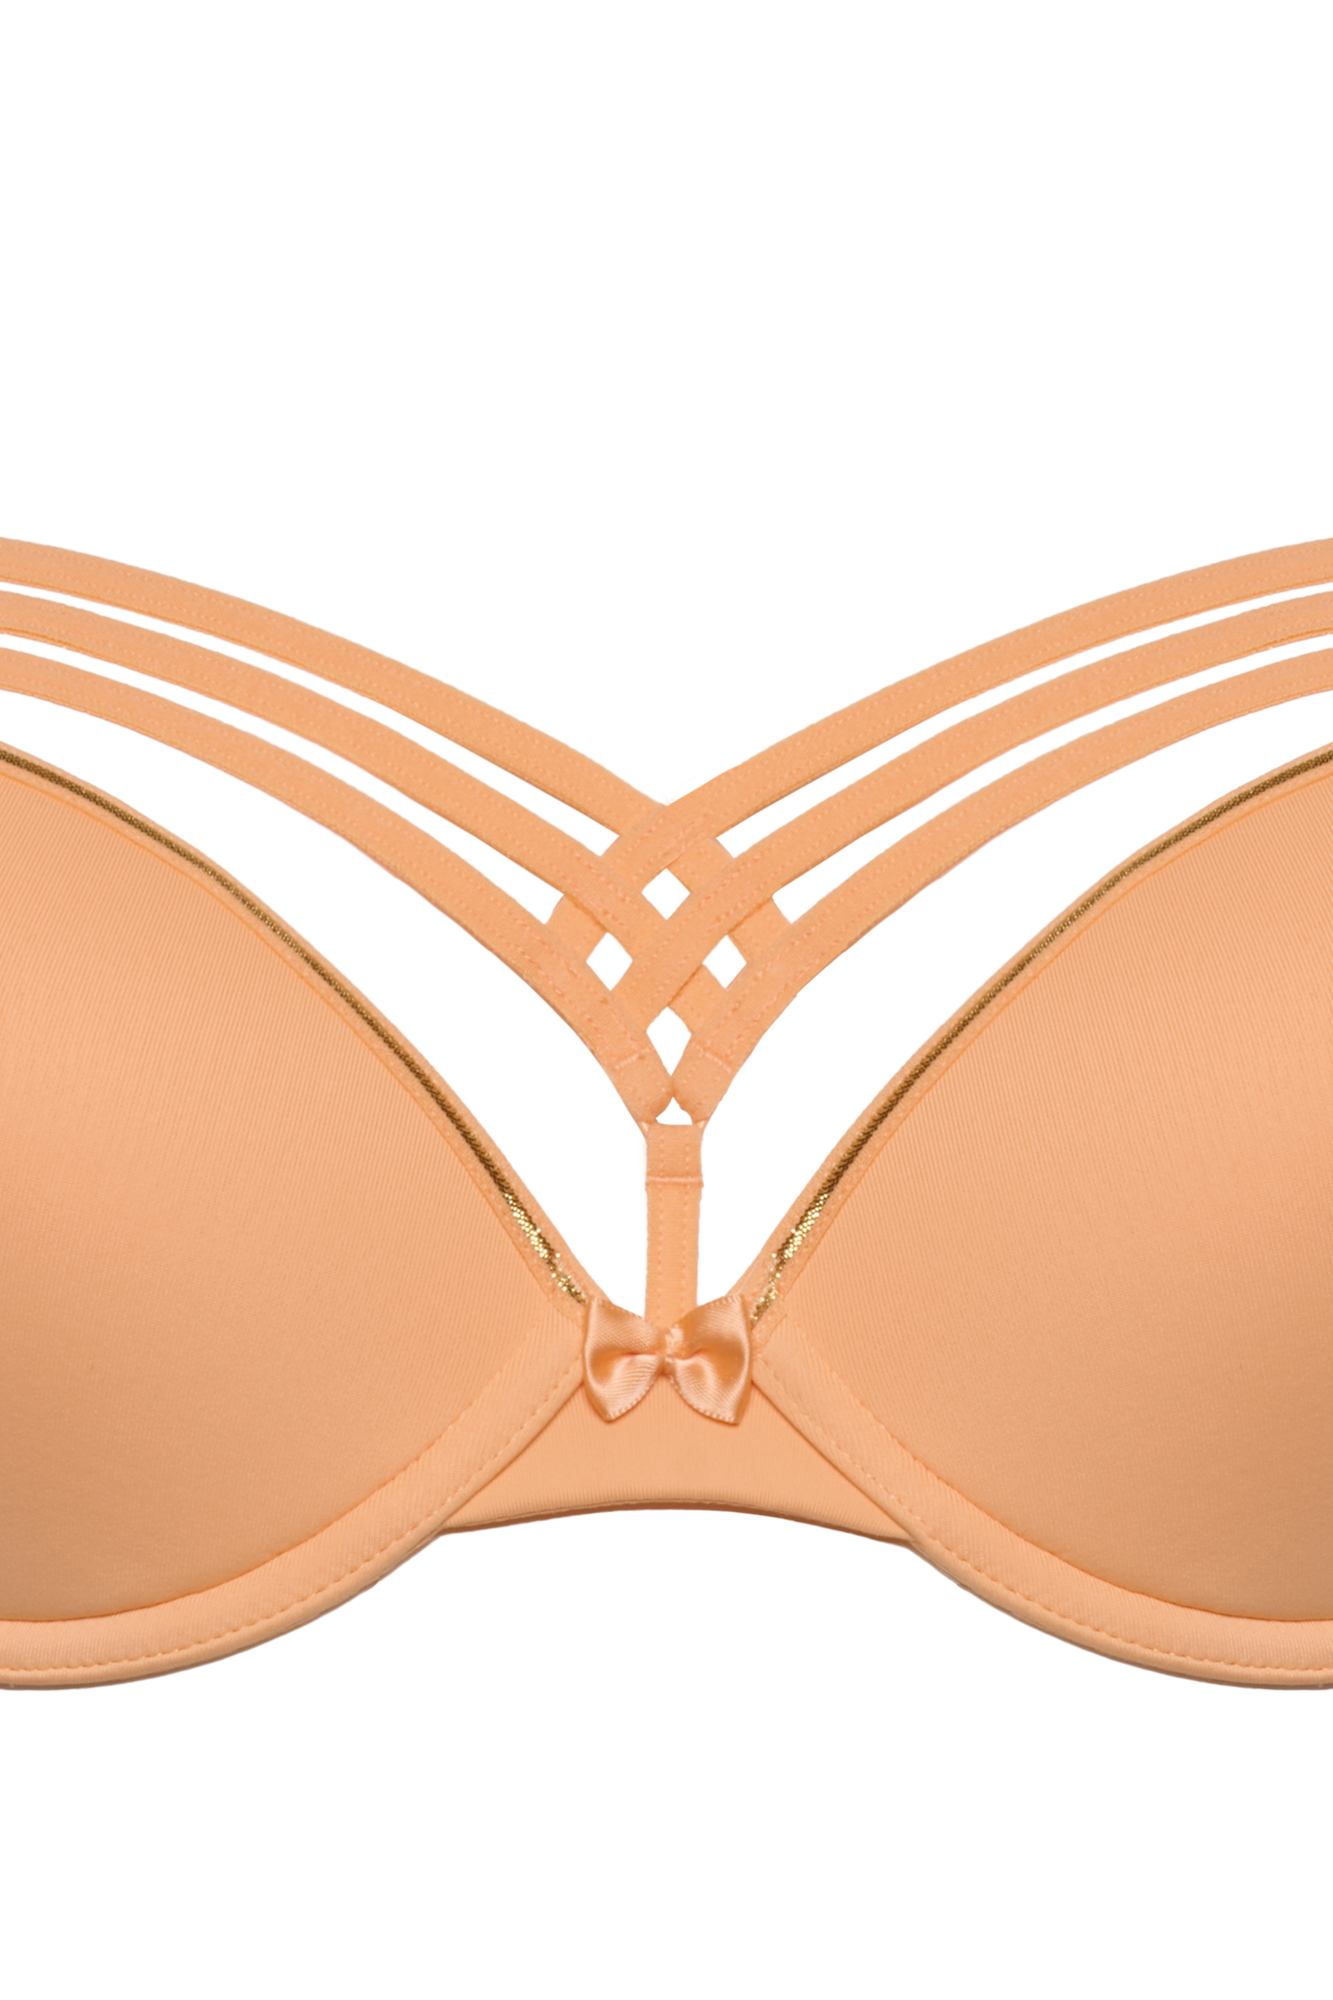 Marlies Dekkers dame de paris push up bh wired padded apricot and gold